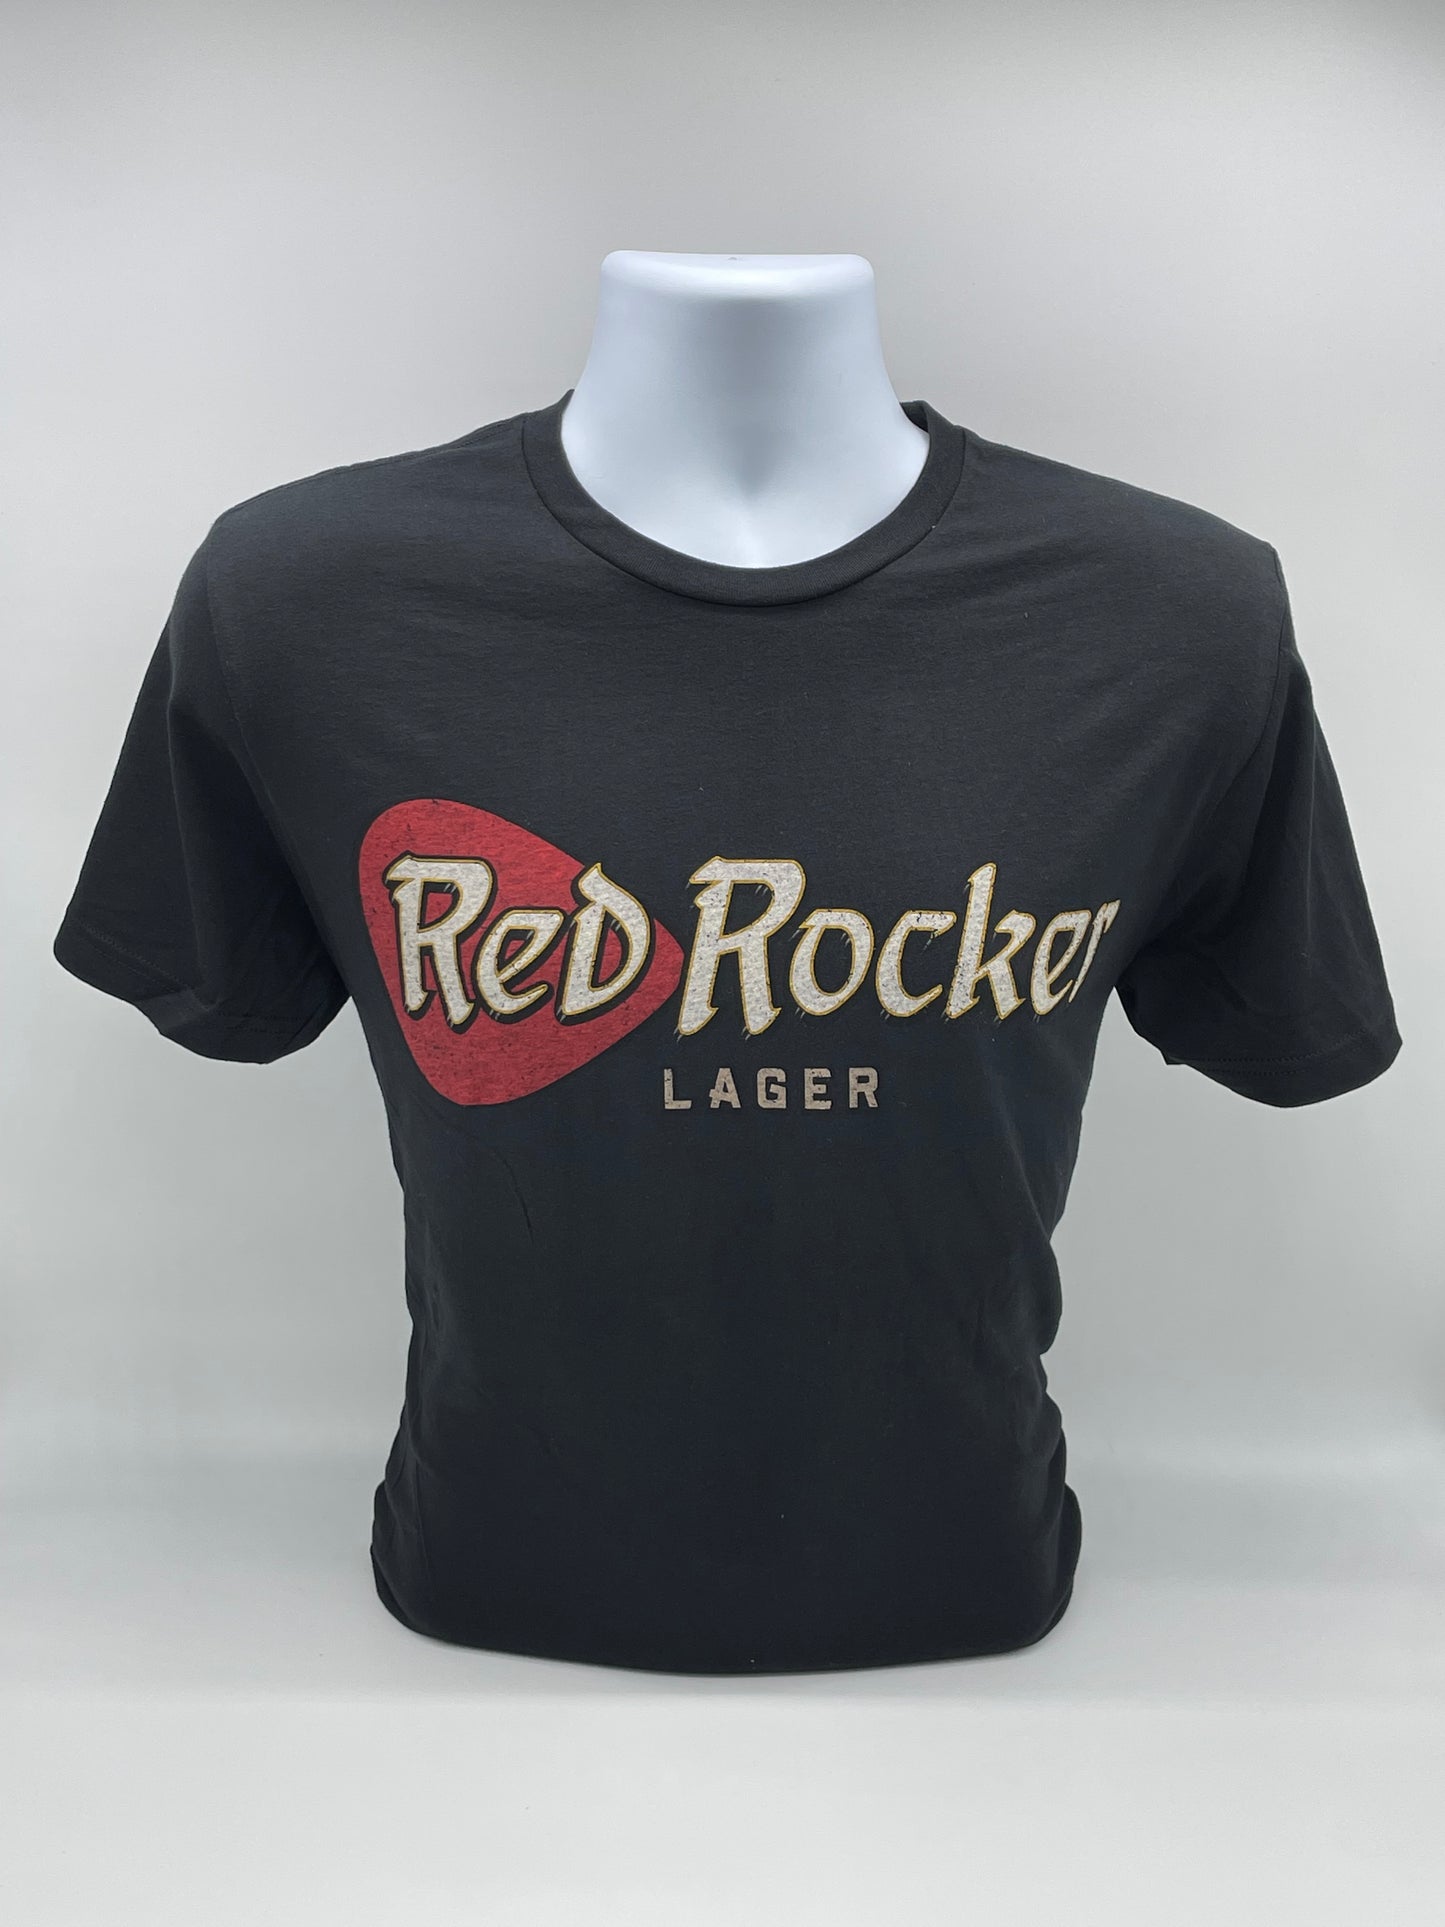 Red Rocker Lager T-shirts